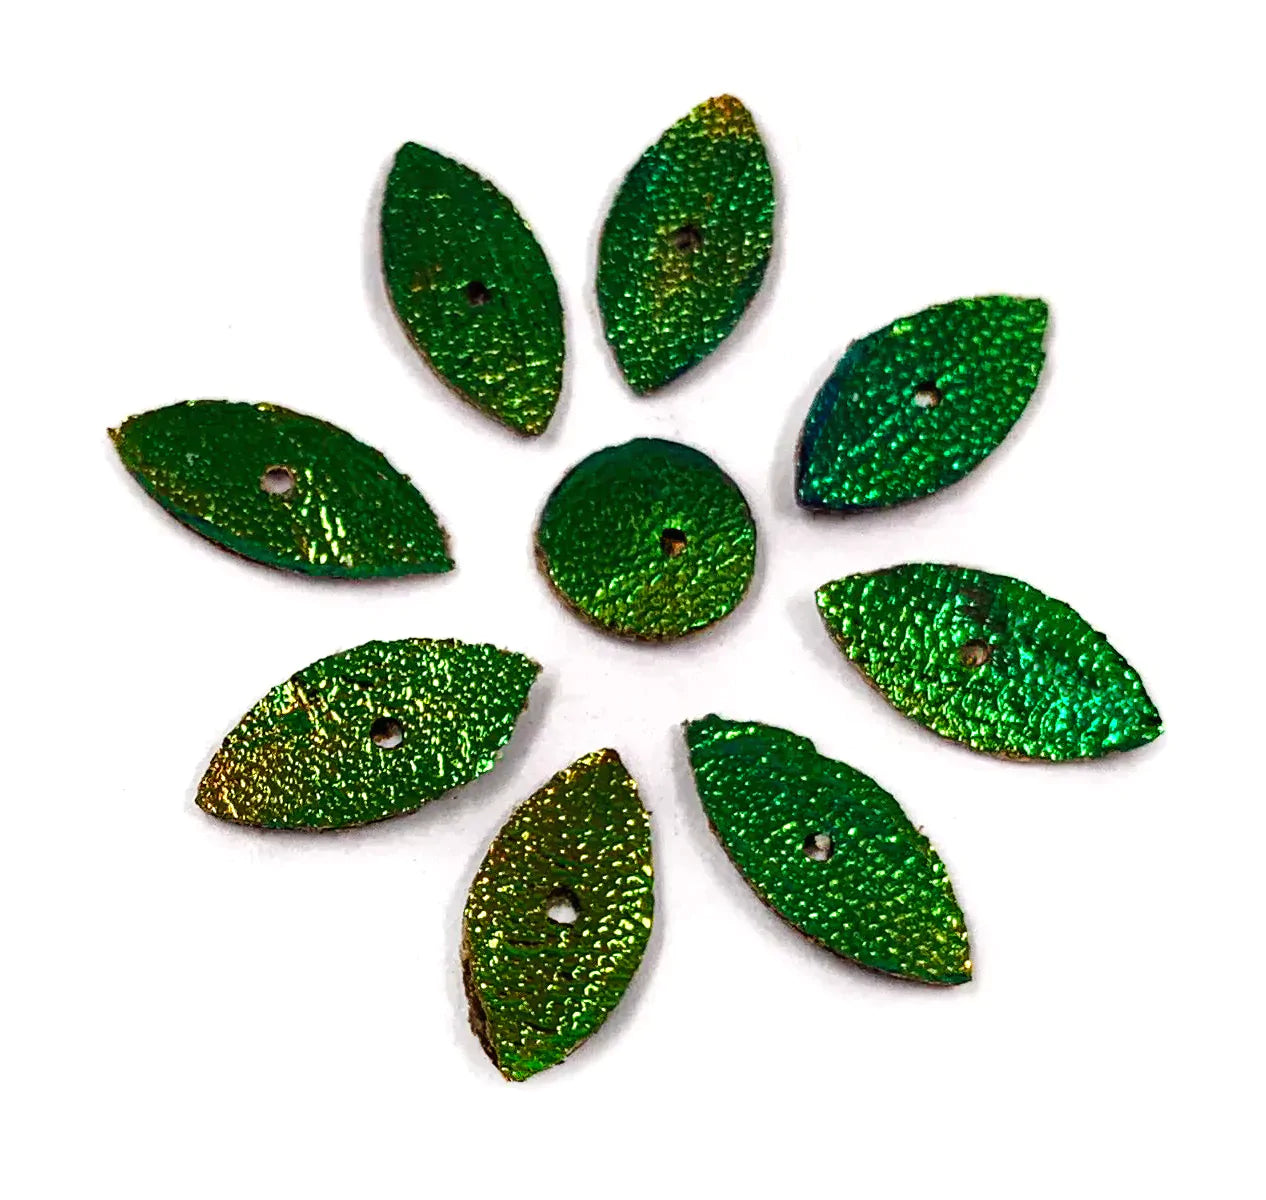 Jewel Beetle Wings UNDRILLED NO-HOLE 100 Pcs Natural Wings - Circle 6 MM